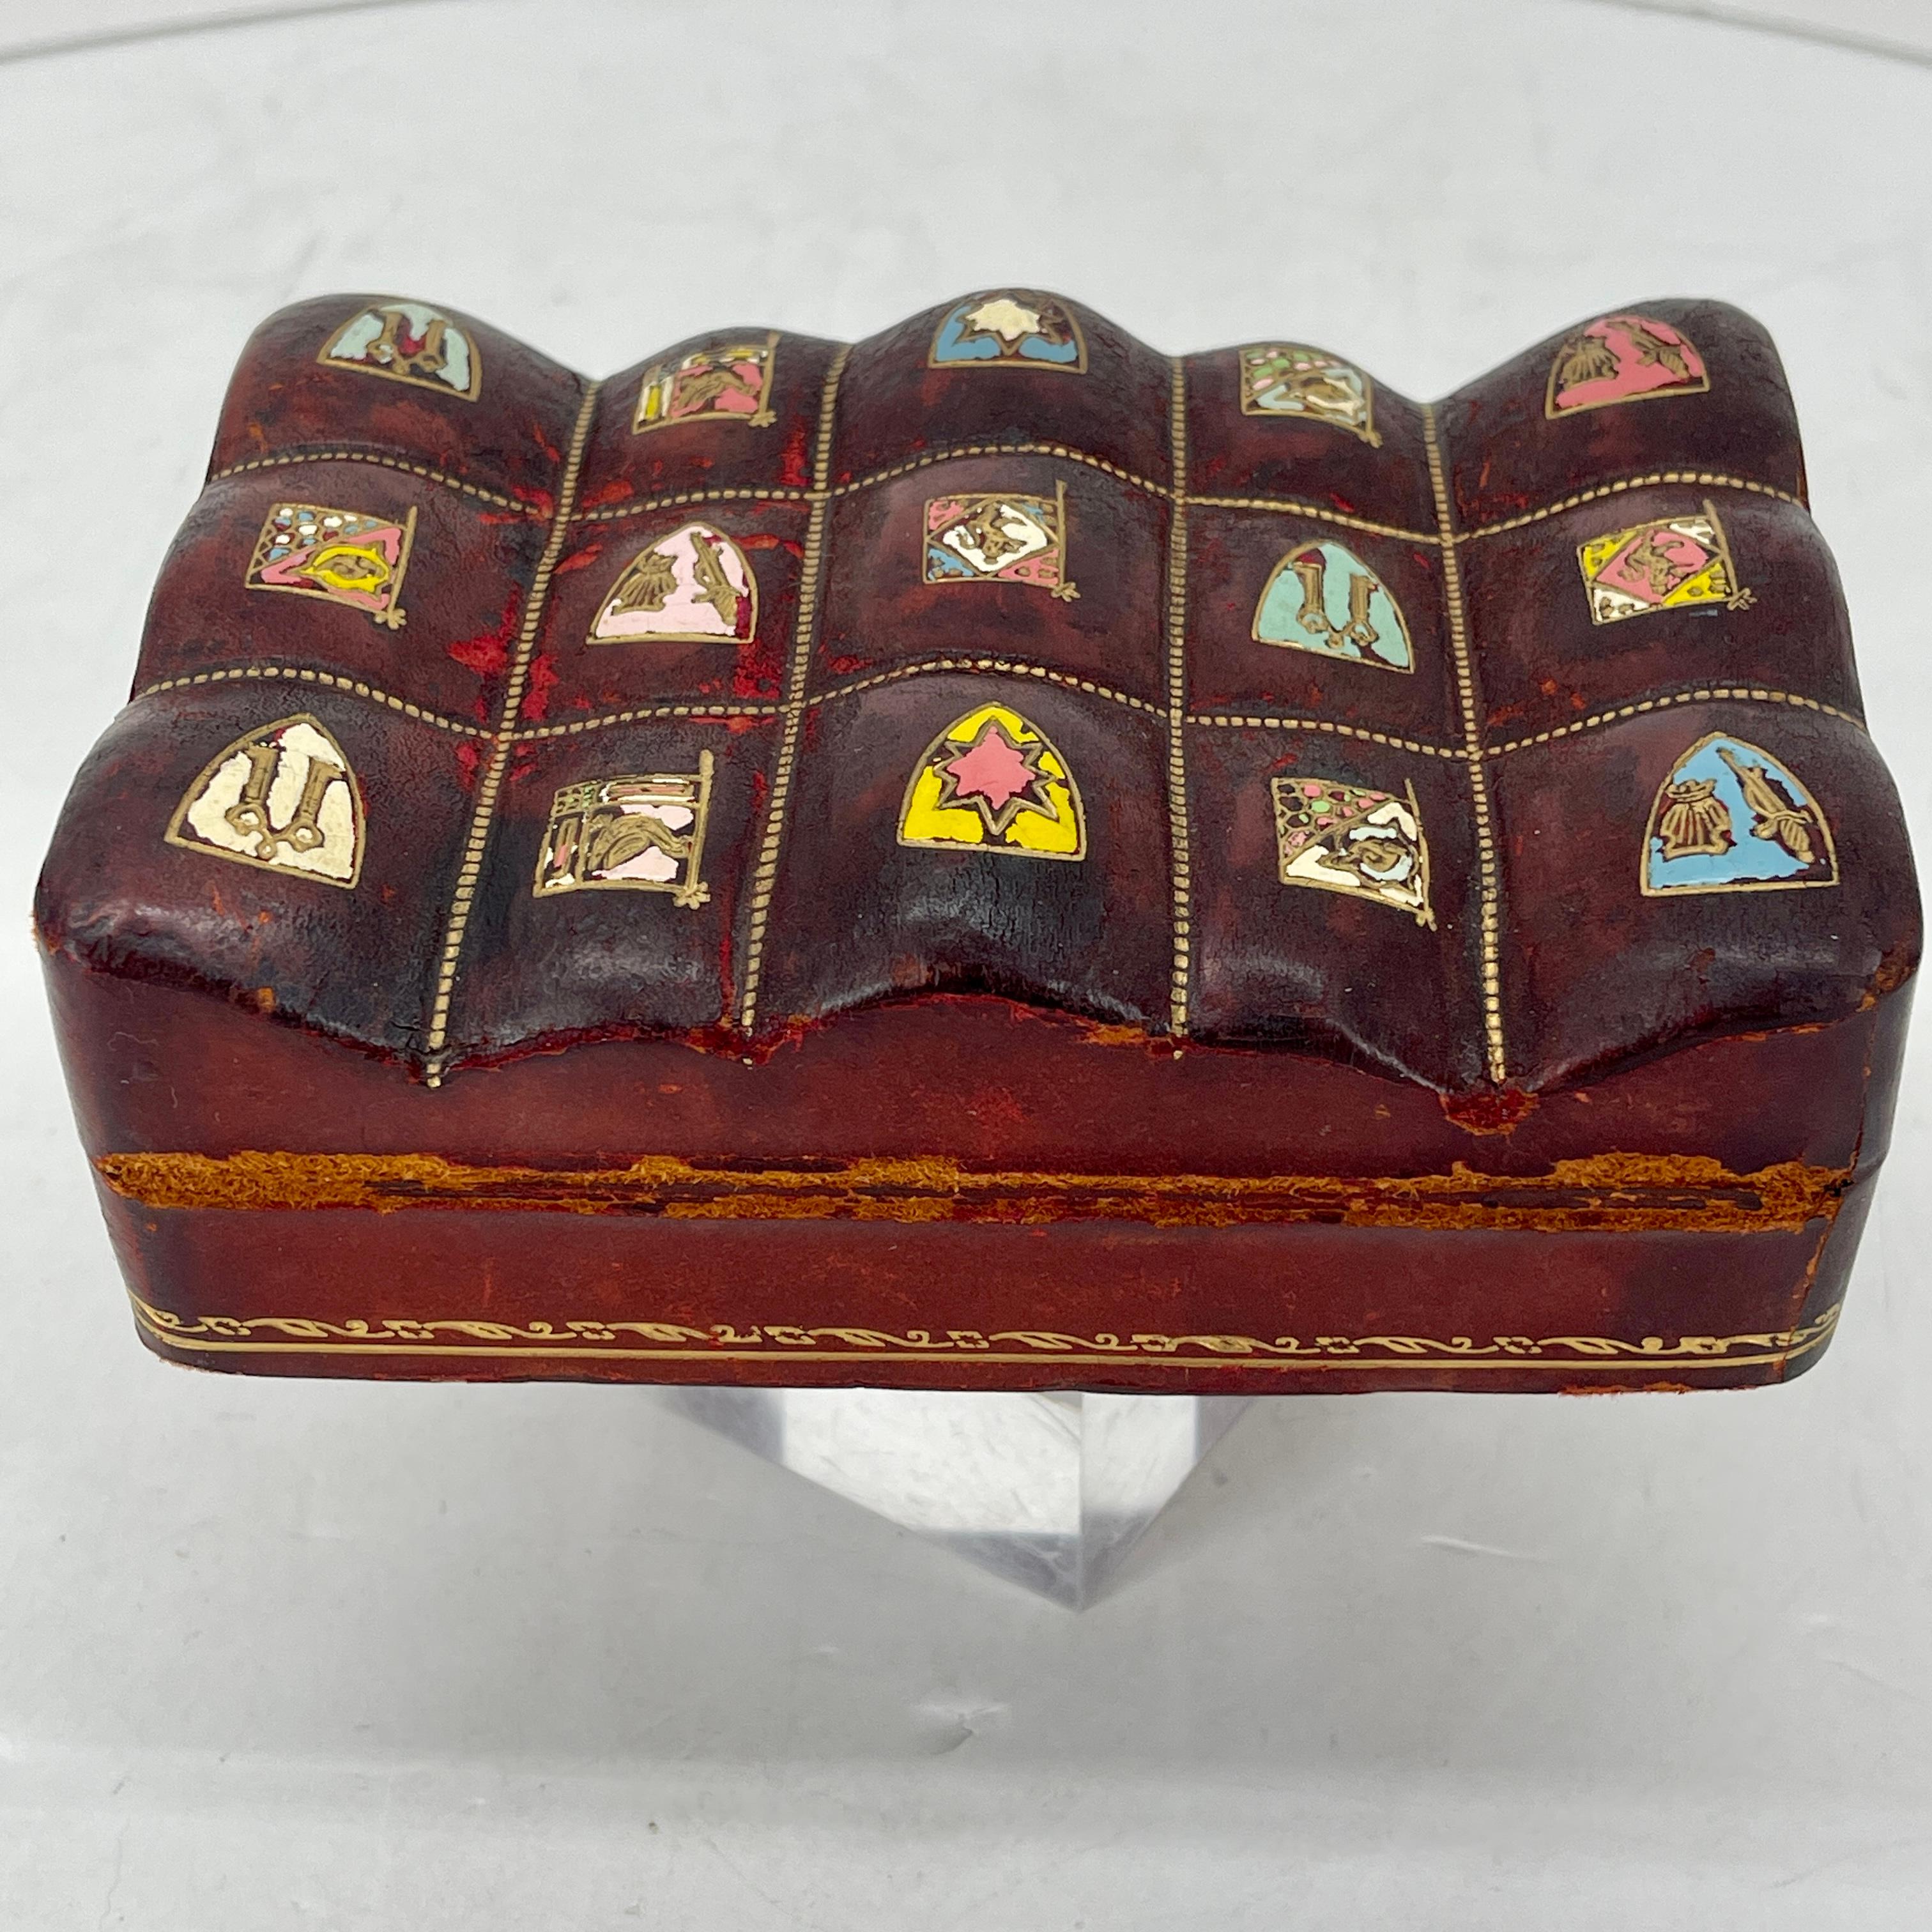 20th Century Vintage Italian Jewelry Box in Burgundy Leather, Circa 1950's For Sale